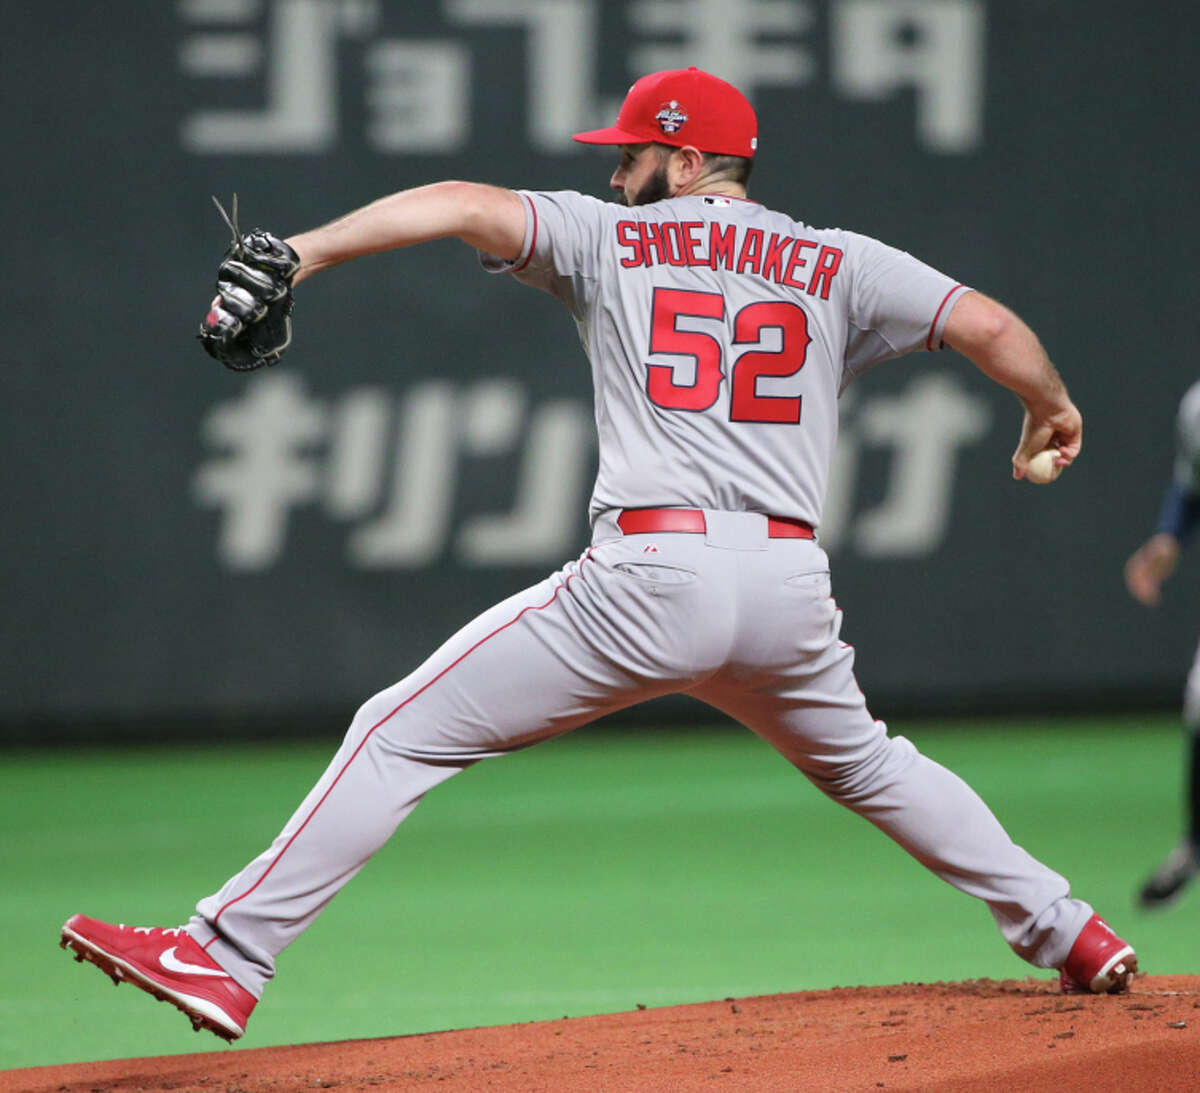 Matt Shoemaker led a 3-1 win for the Major League All-Stars in Sapporo in the Japan series finale.